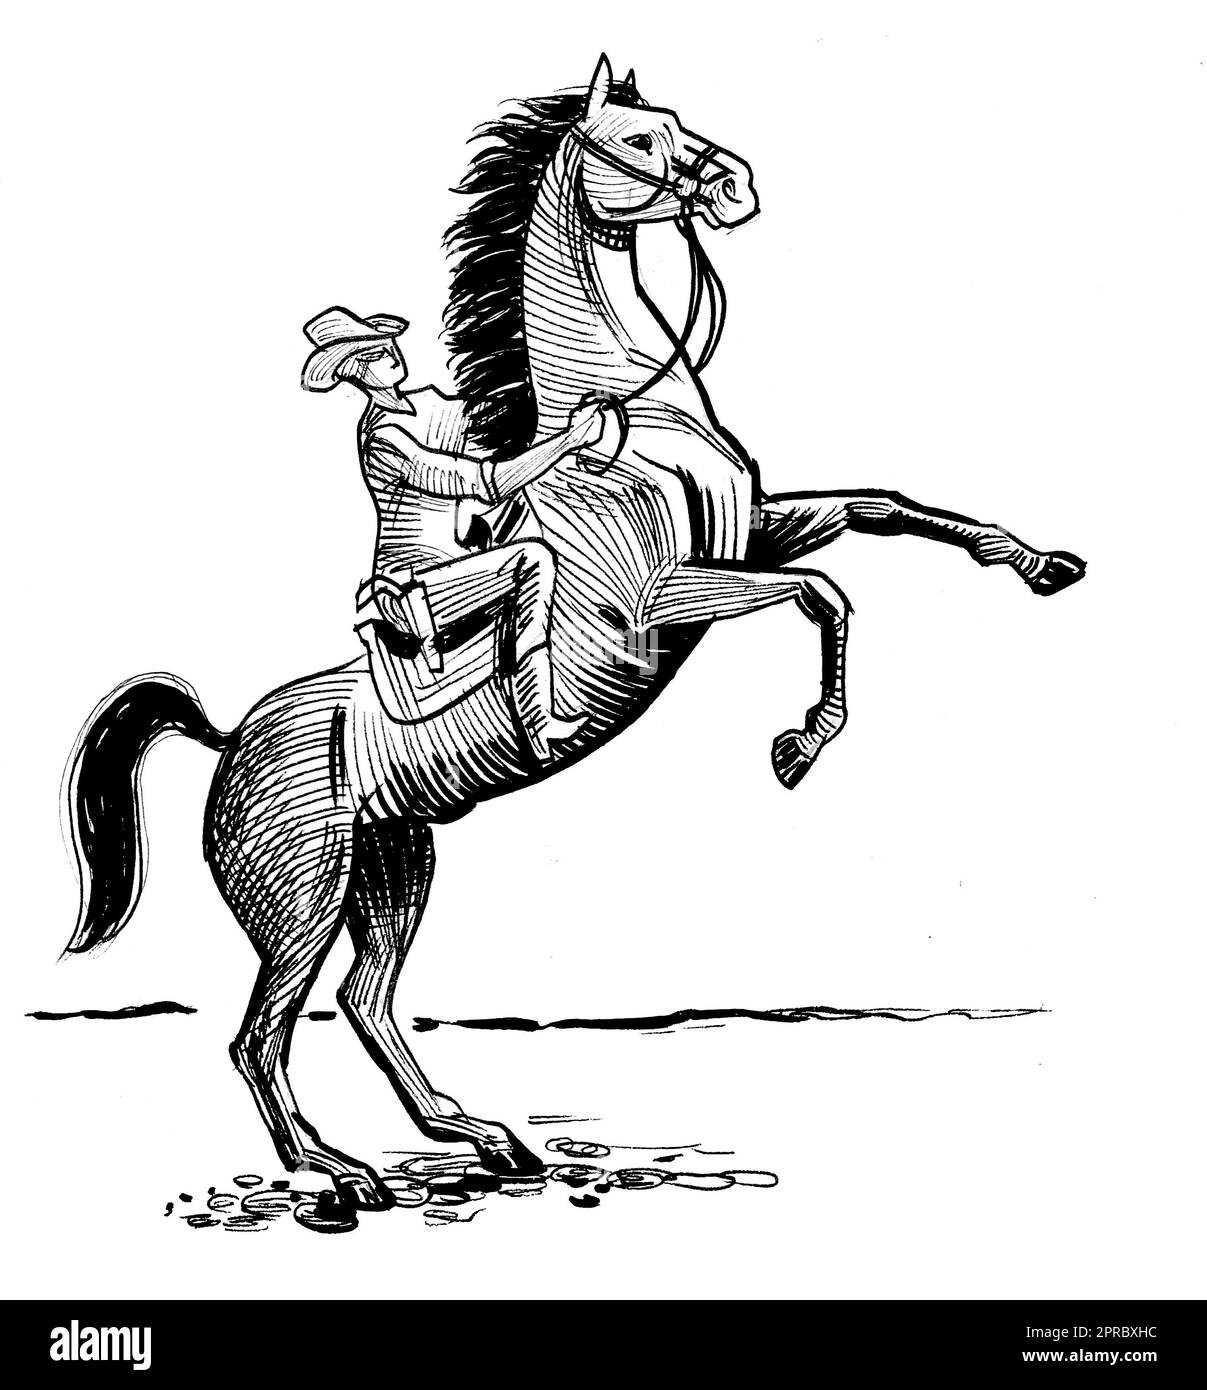 Cowboy riding a wild horse. Hand drawn on paper, ink black and white illustration Stock Photo